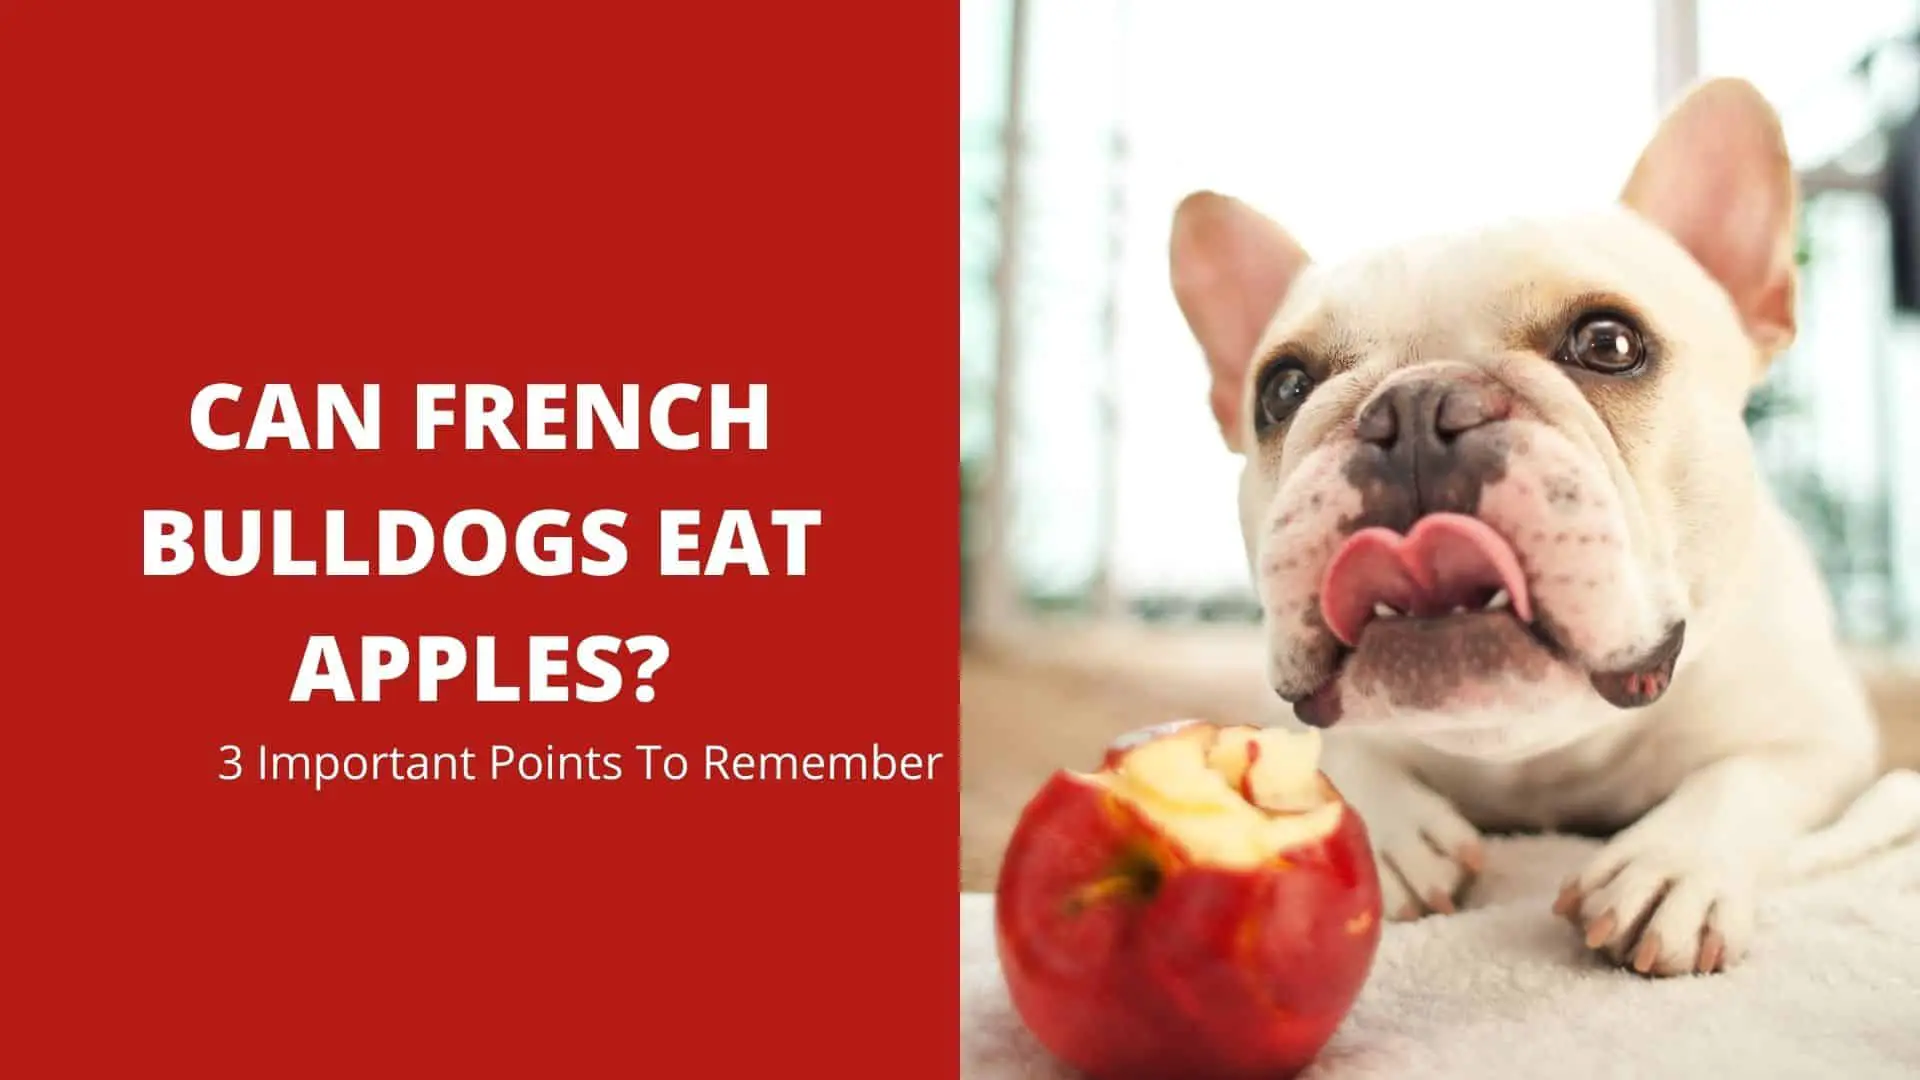 Can French Bulldogs Eat Apples? 3 Important Points To Remember